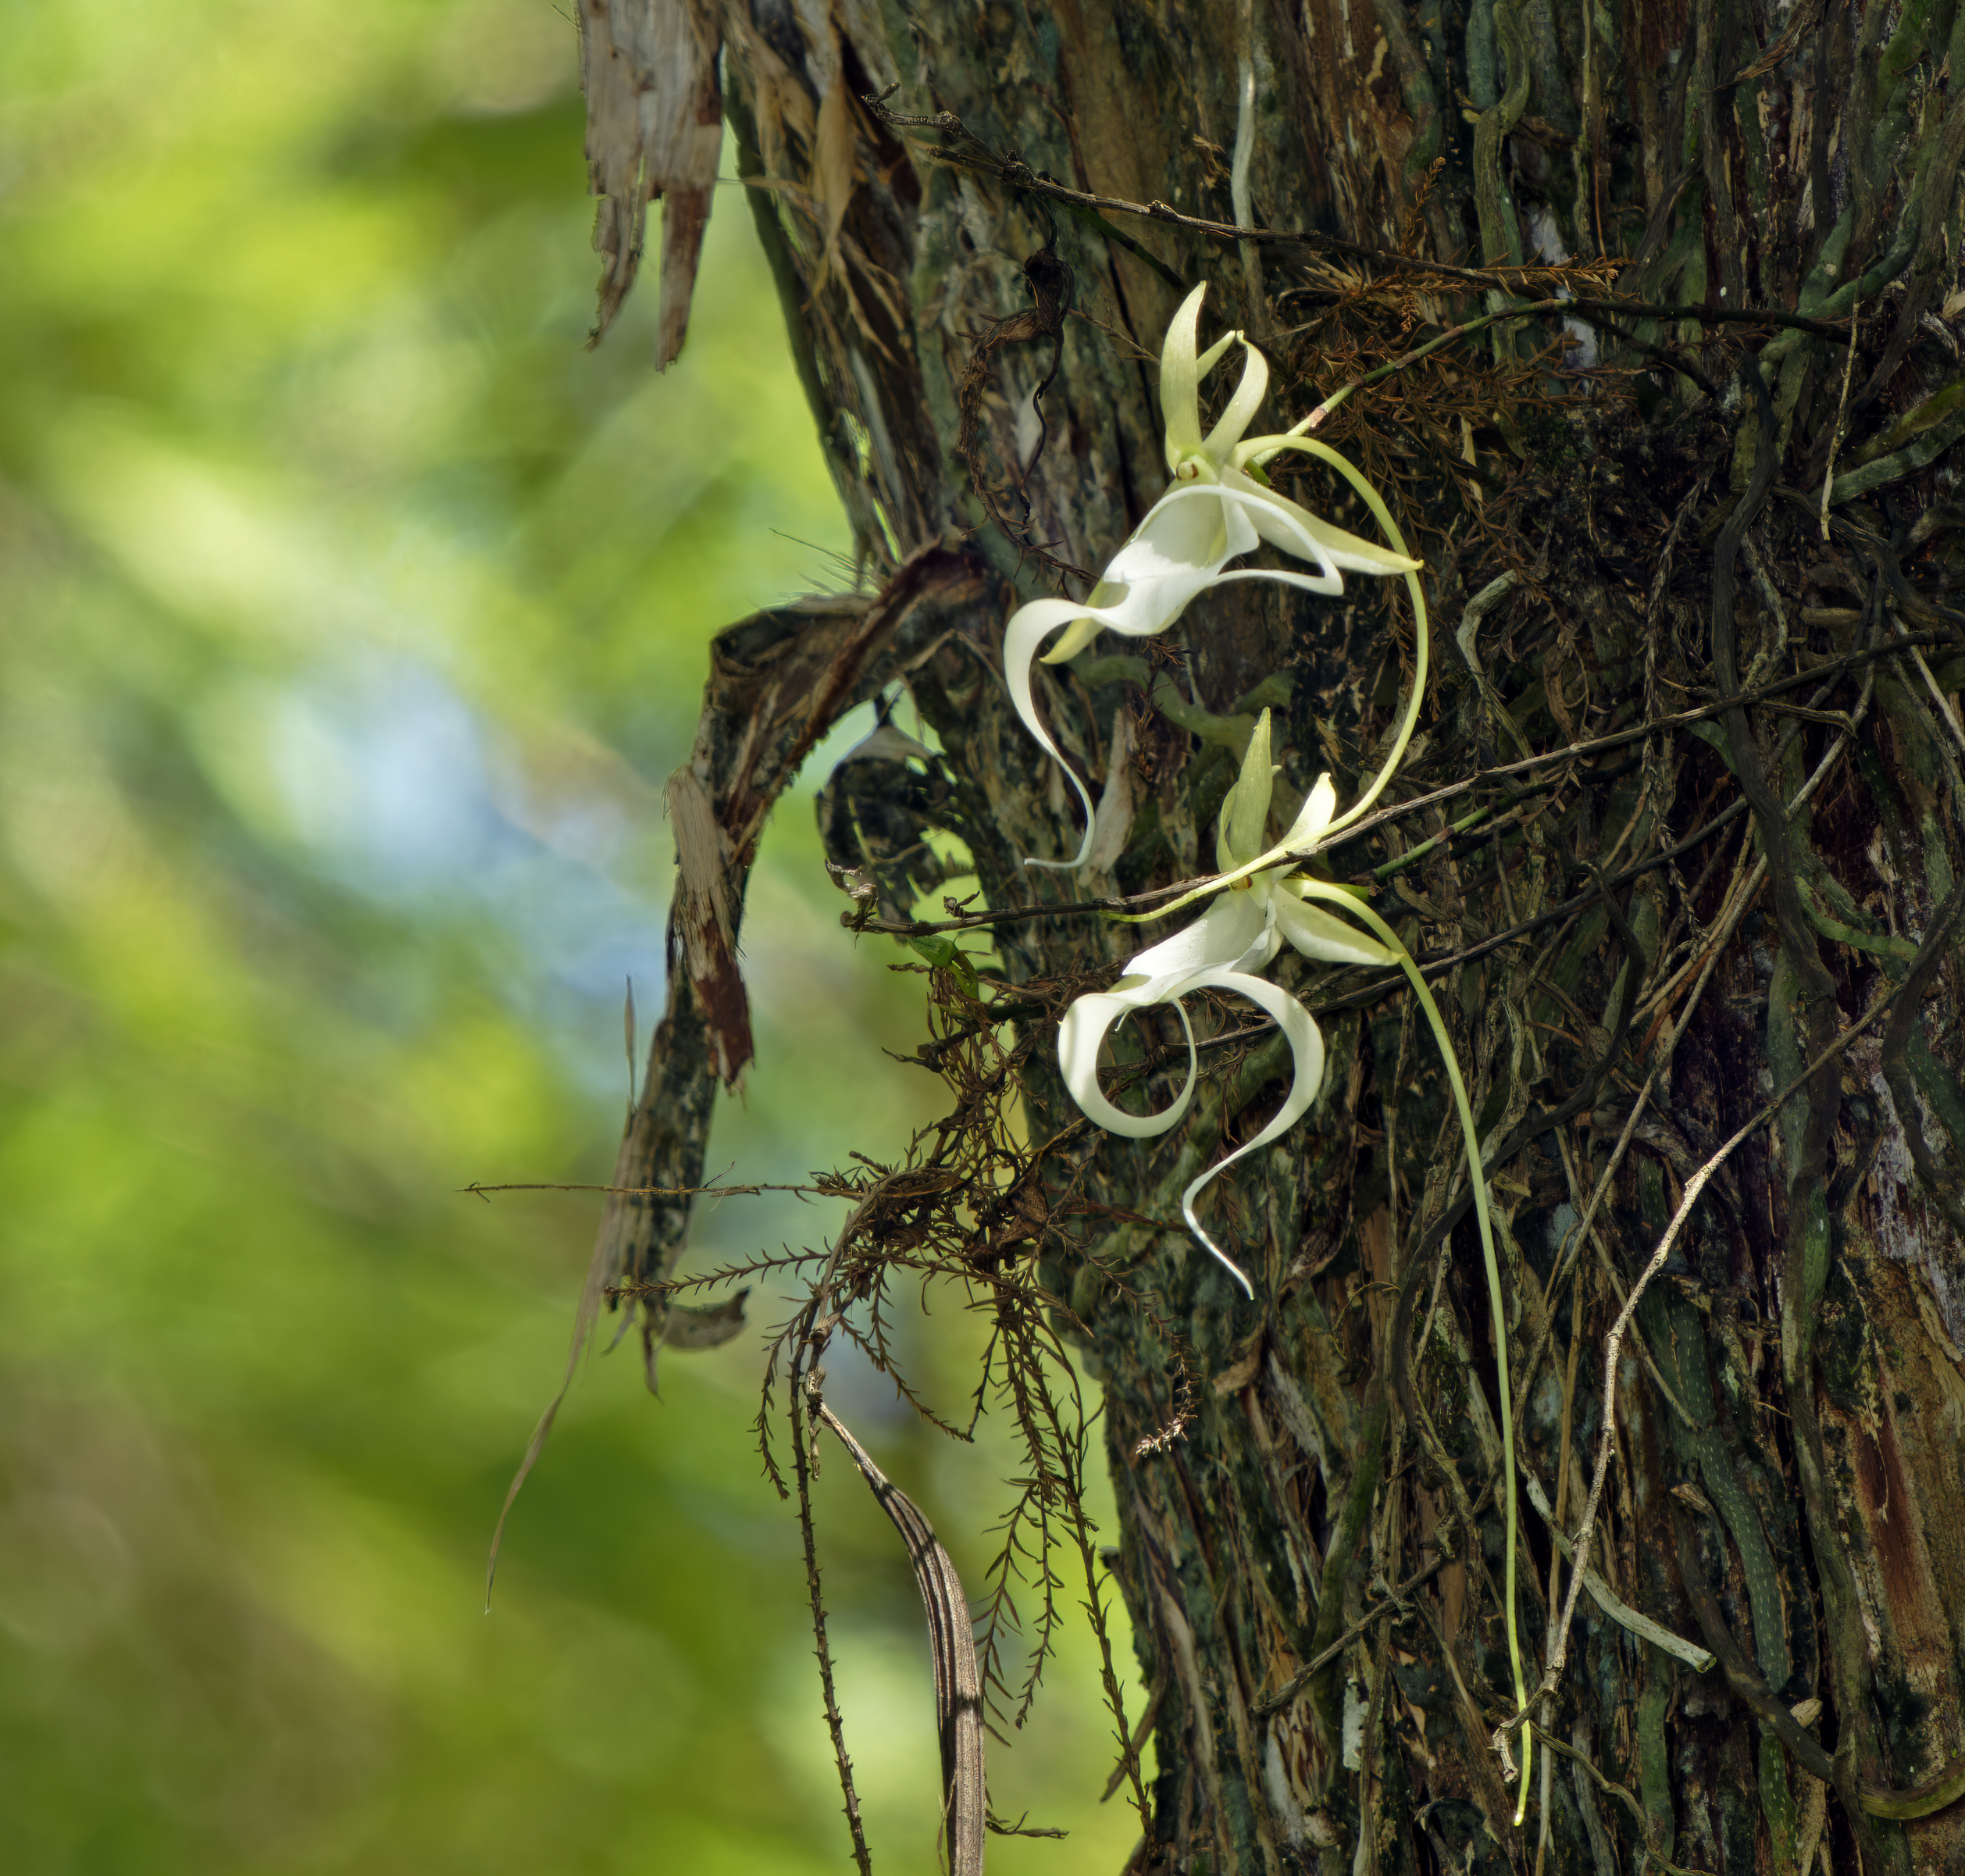 Close-up of orchid blossoms on a tree